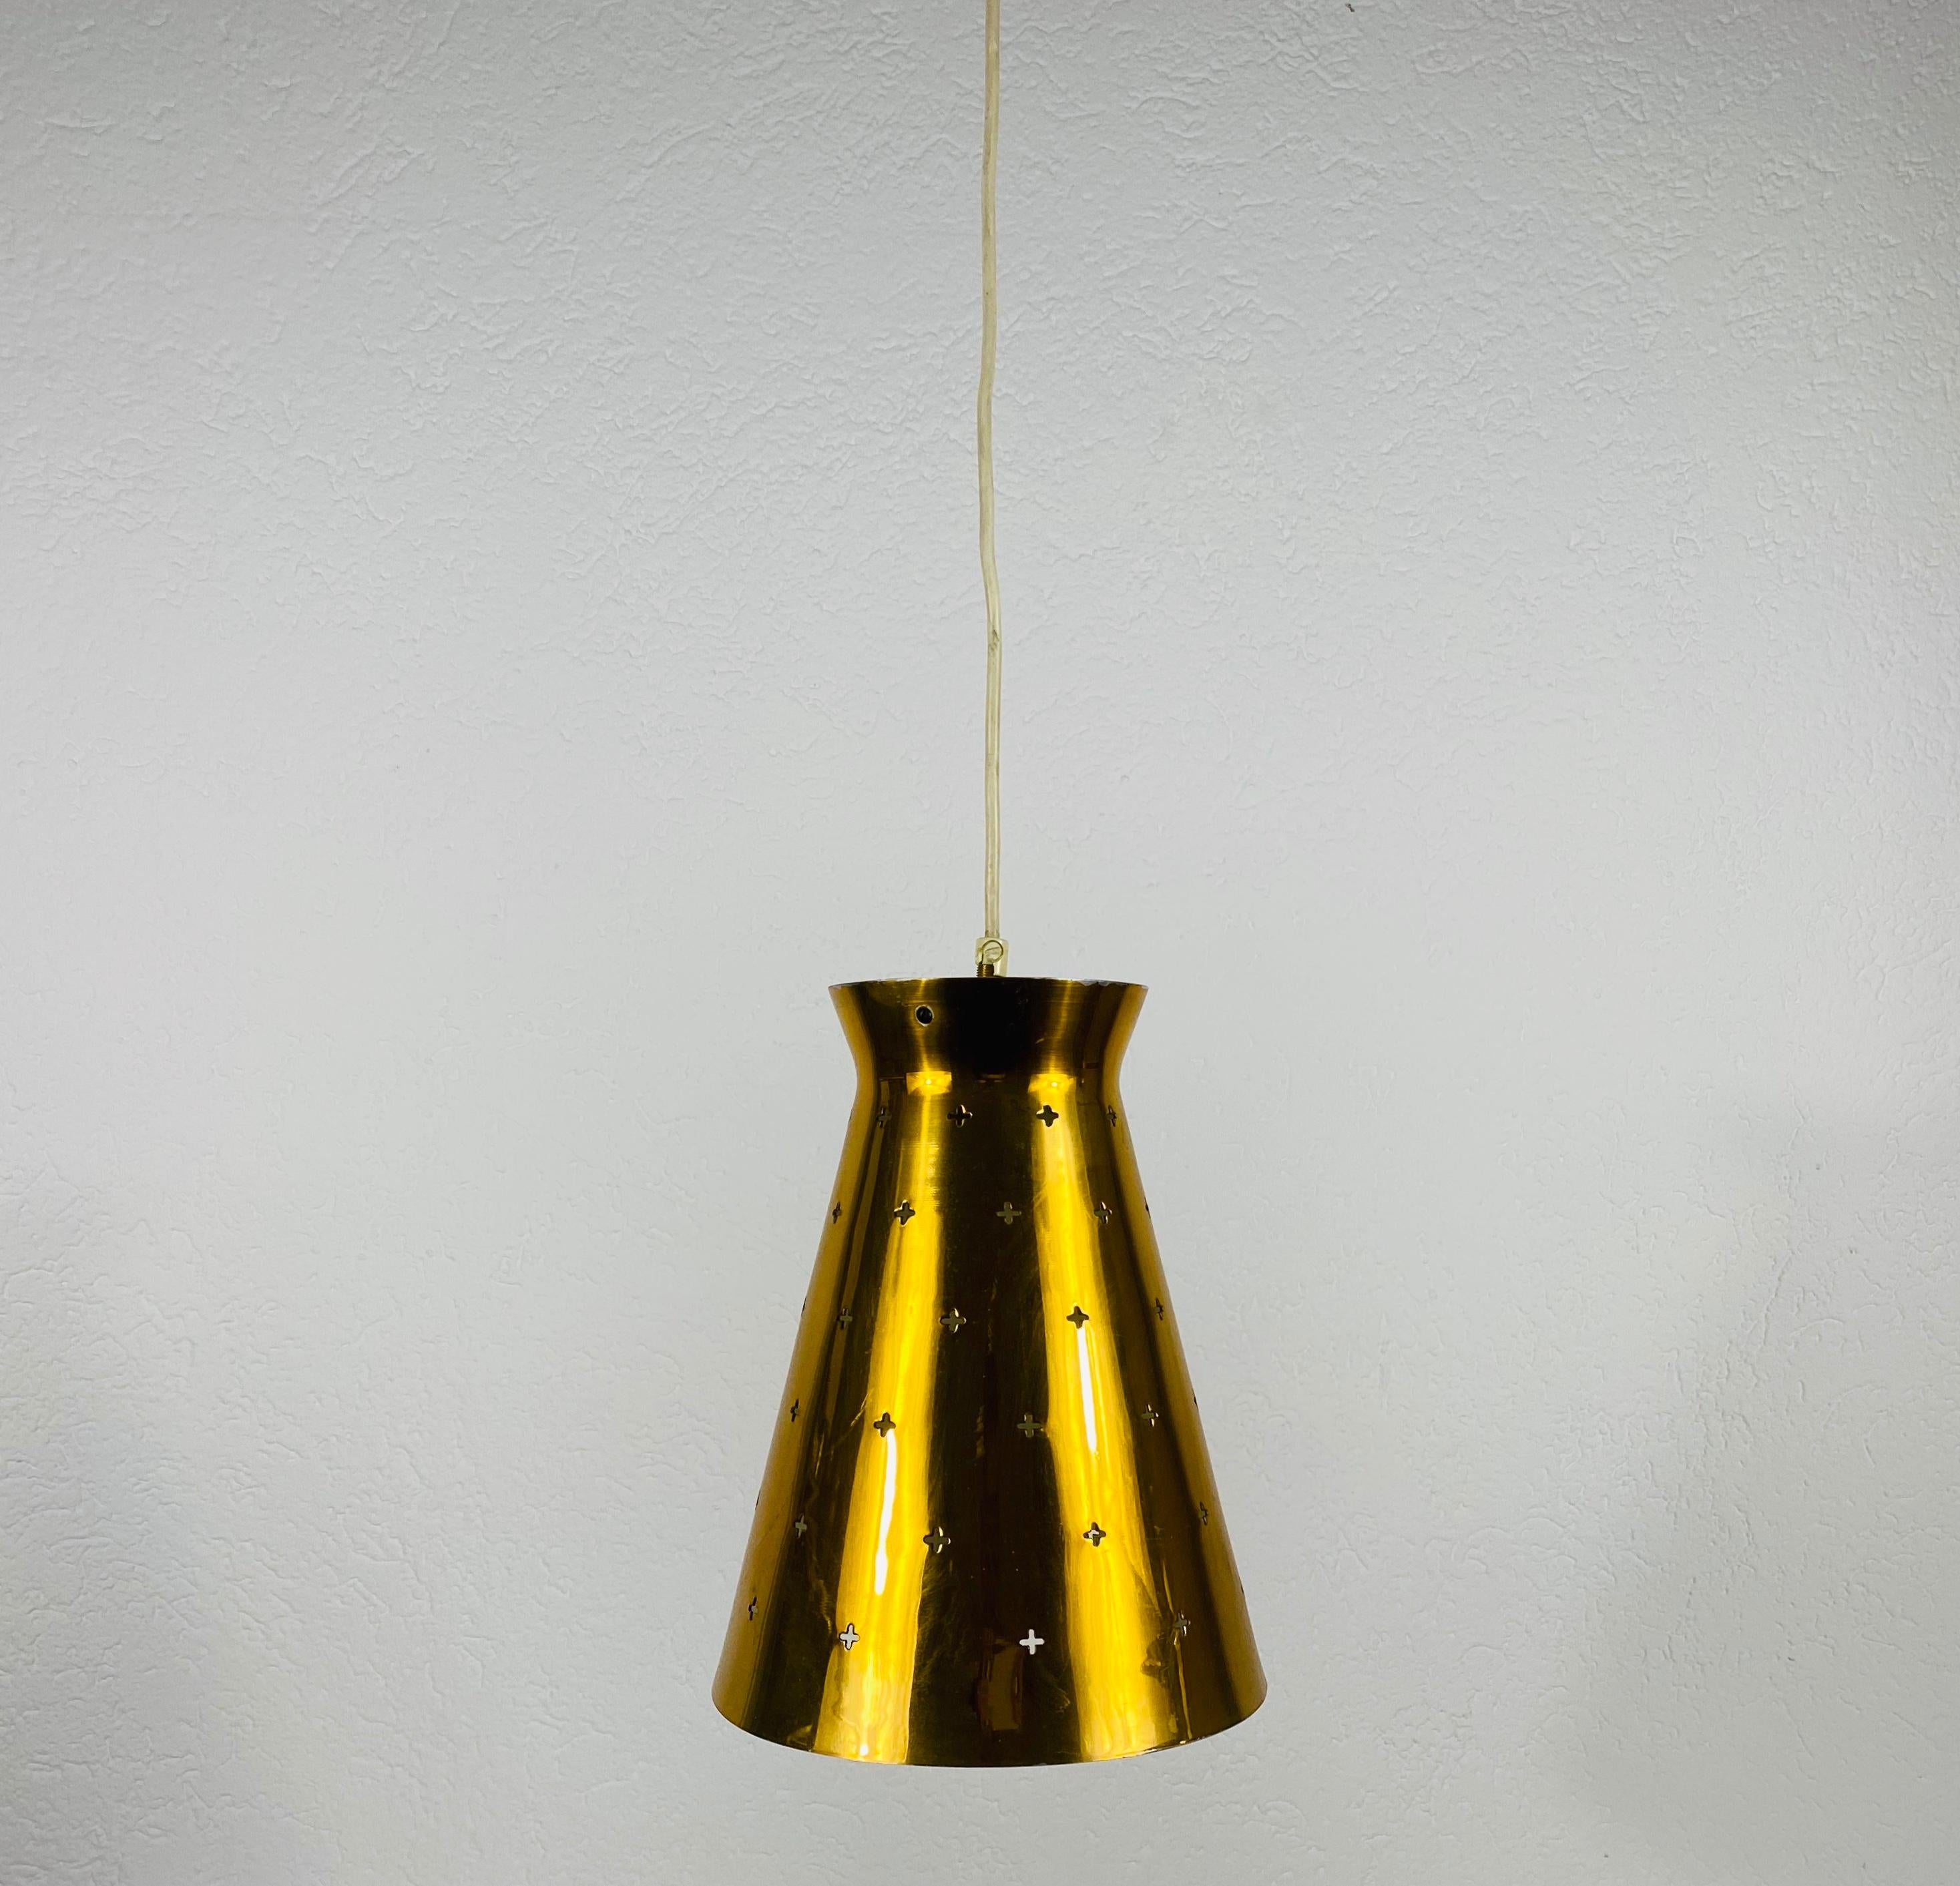 Very rare pendant lamp in the style of Paavo Tynell, made in Finland in the 1950s. The lighting is made of full of brass. It has many small holes which are creating beautiful light. The lighting requires one E27 (US E26) light bulb.

Measures: